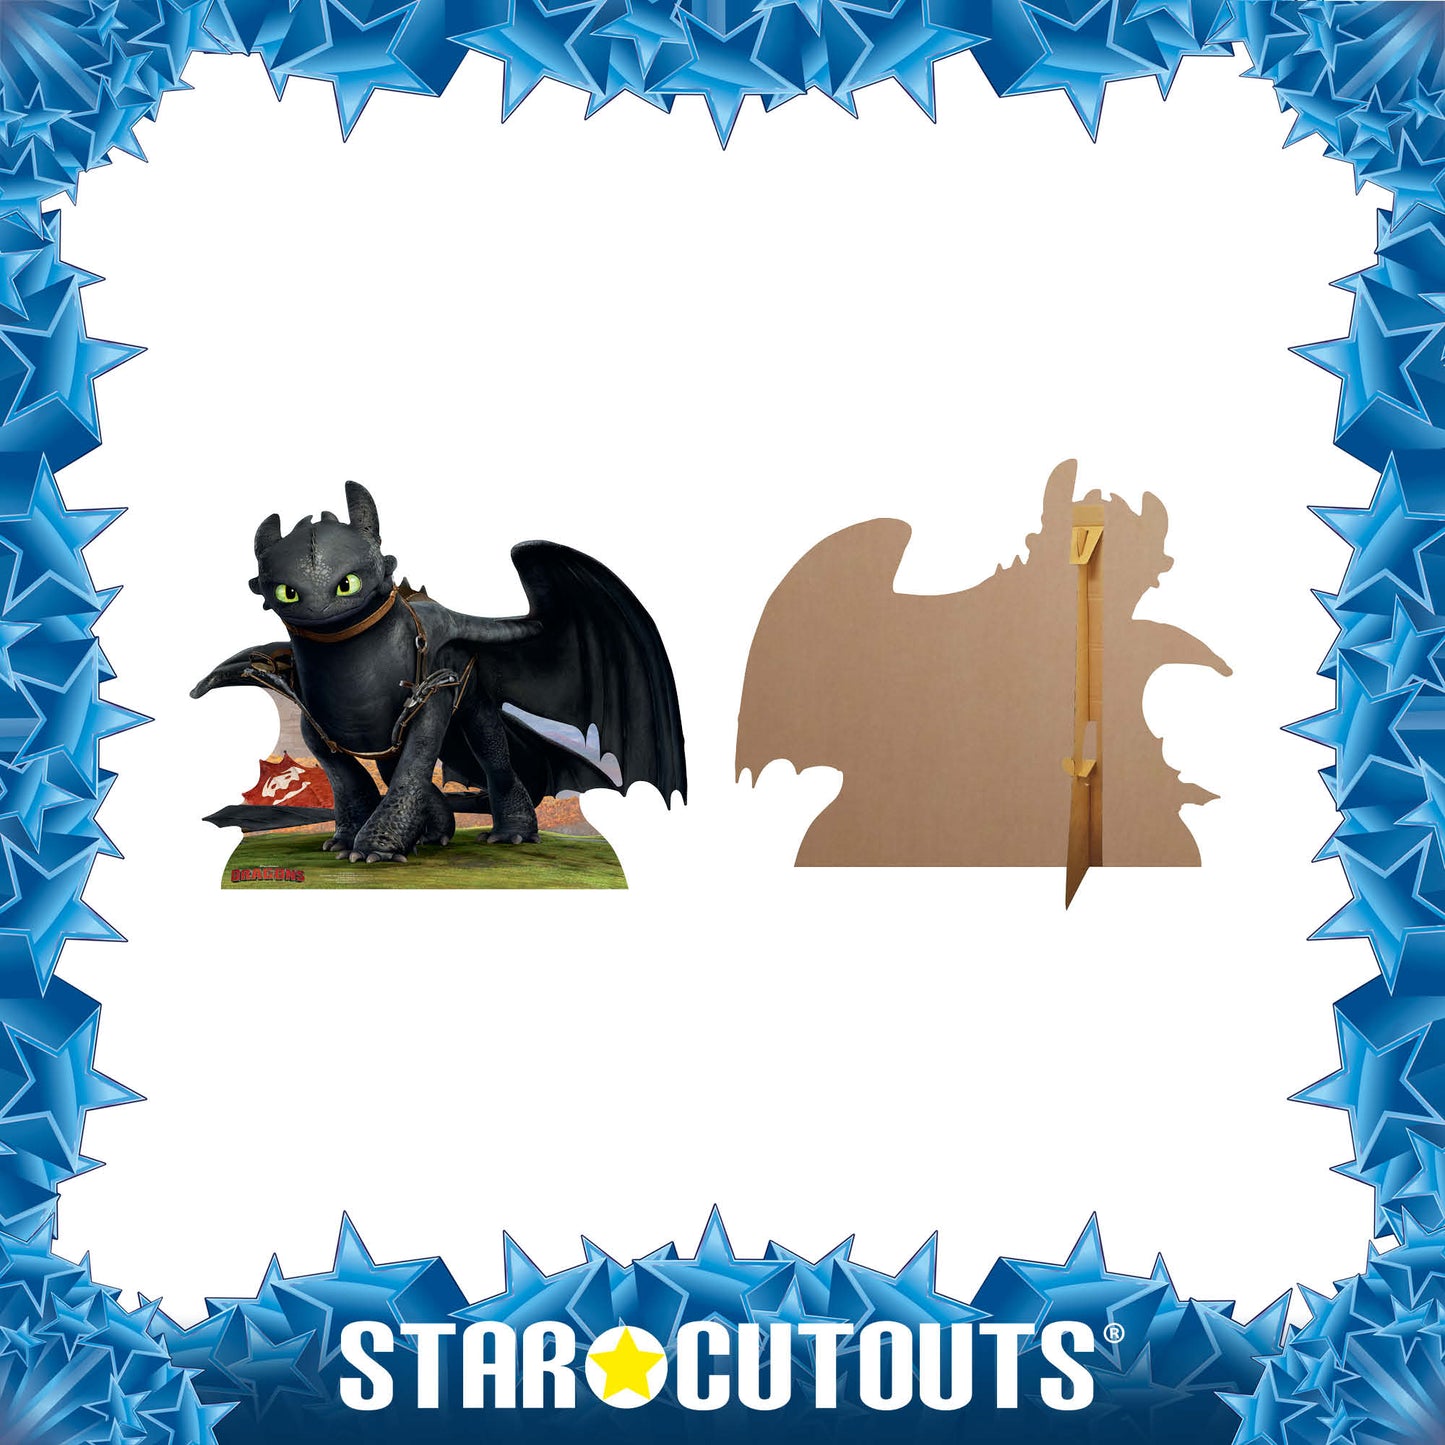 SC736 Toothless Dragon Cardboard Cut Out Height 100cm